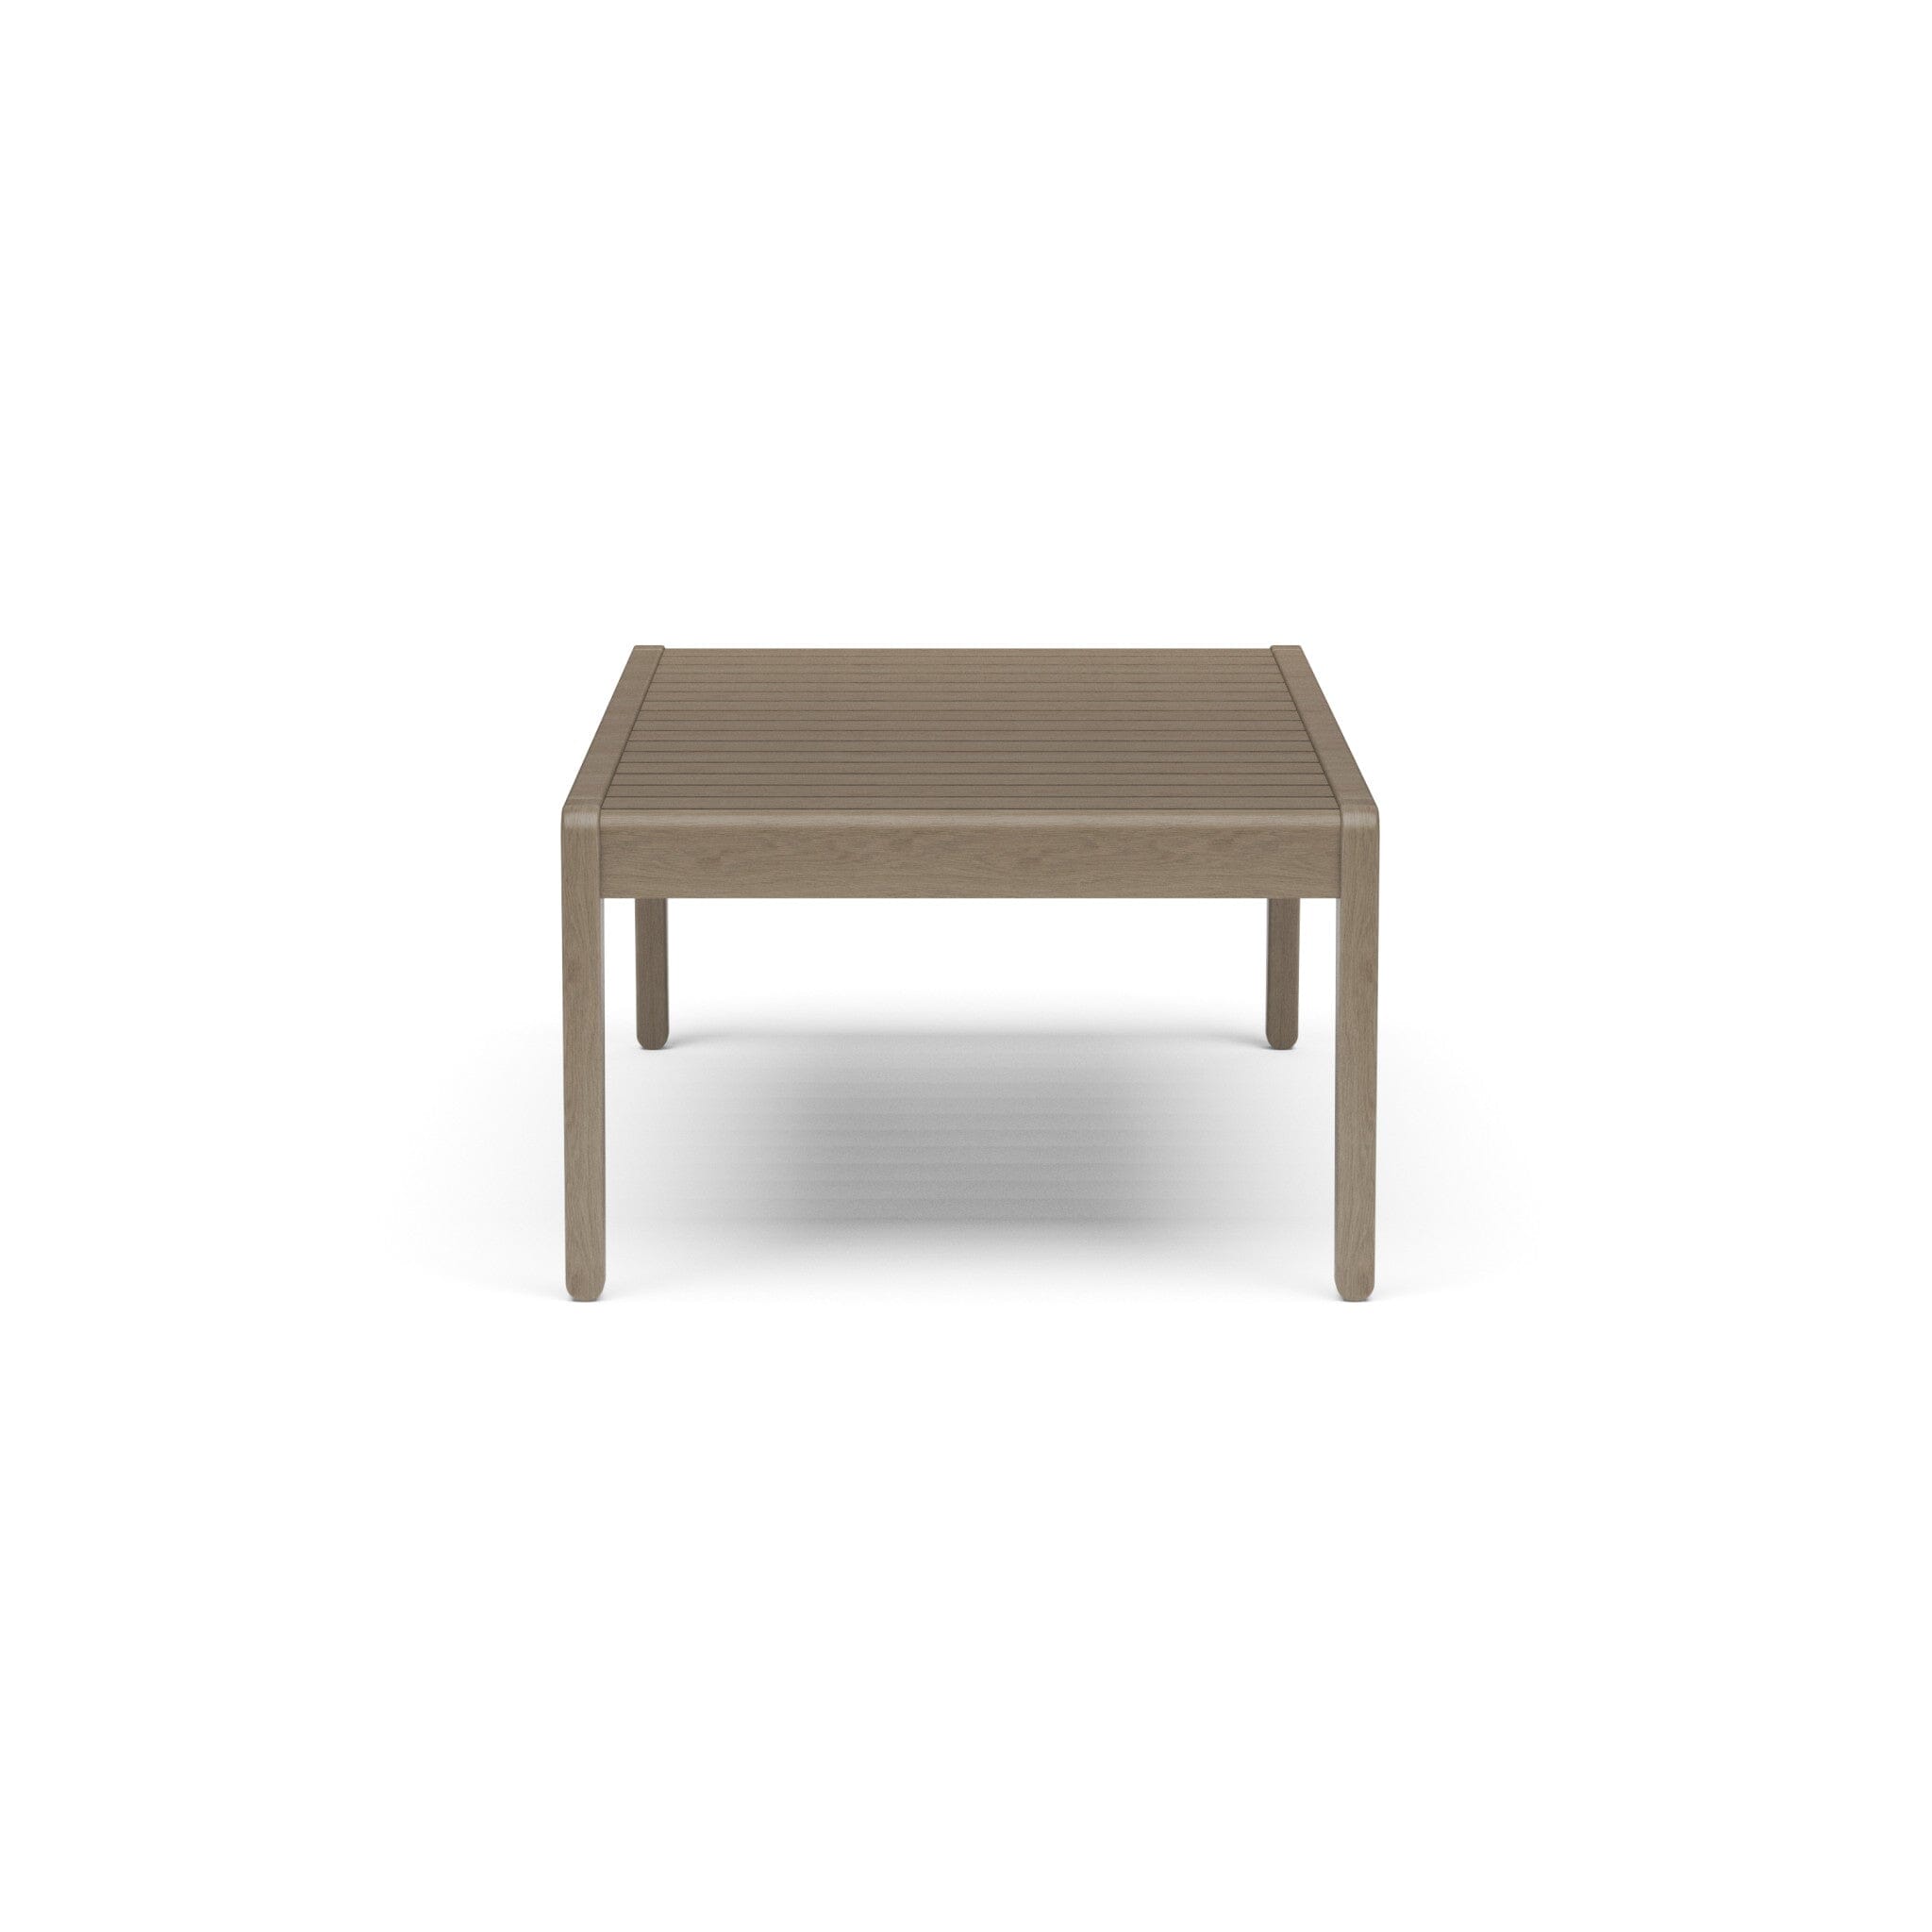 Transitional Outdoor Coffee Table By Sustain Outdoor Coffee Table Sustain